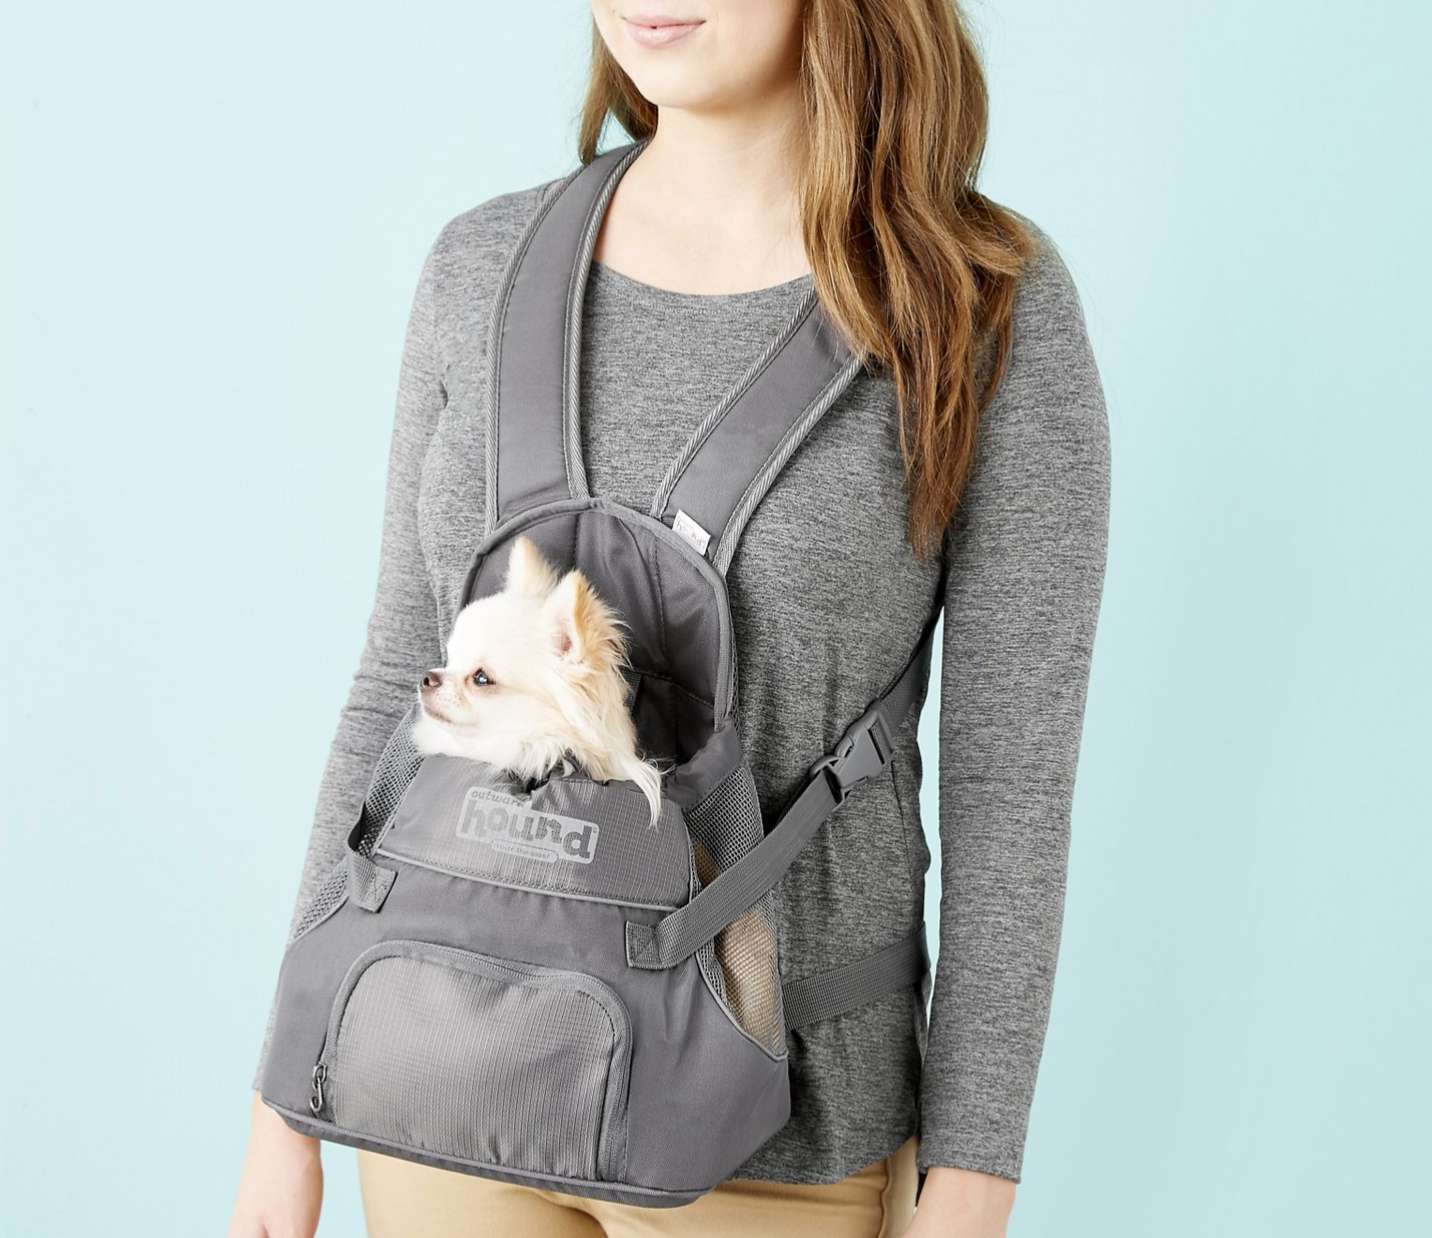 Outward Hound PoochPouch Front Backpack - Molly's Healthy Pet Food Market